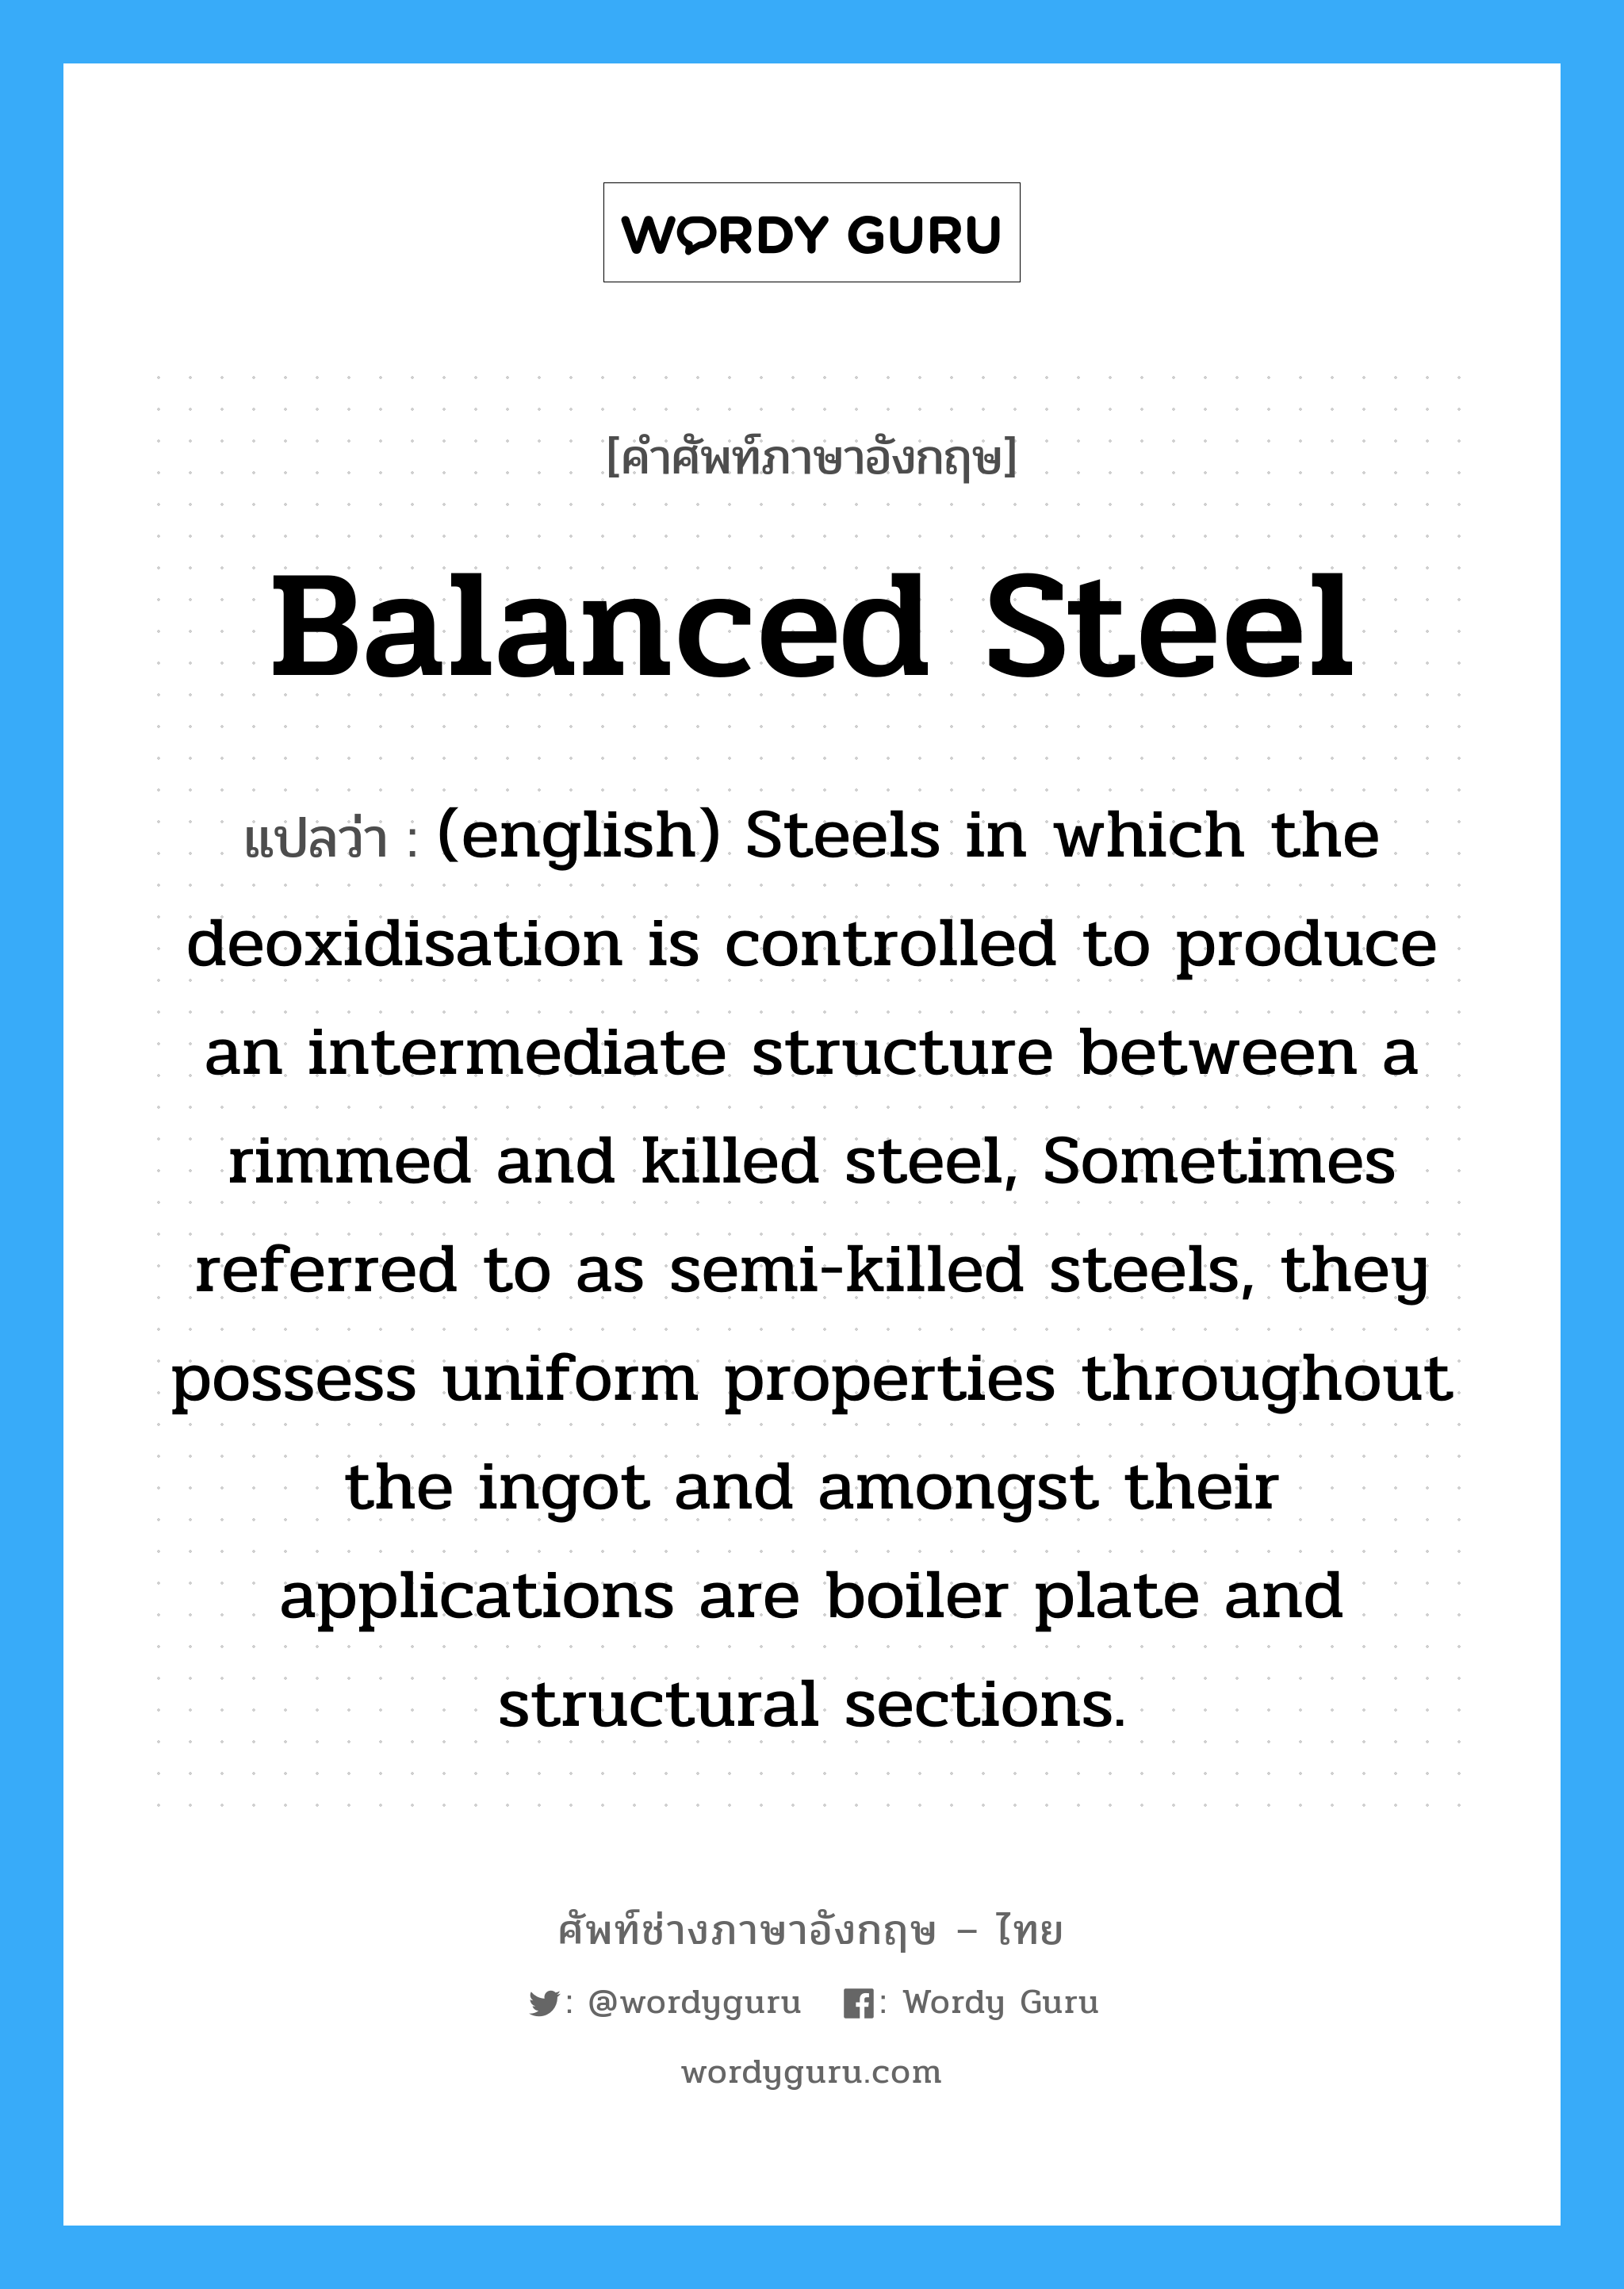 (english) Steels in which the deoxidisation is controlled to produce an intermediate structure between a rimmed and killed steel, Sometimes referred to as semi-killed steels, they possess uniform properties throughout the ingot and amongst their applications are boiler plate and structural sections. ภาษาอังกฤษ?, คำศัพท์ช่างภาษาอังกฤษ - ไทย (english) Steels in which the deoxidisation is controlled to produce an intermediate structure between a rimmed and killed steel, Sometimes referred to as semi-killed steels, they possess uniform properties throughout the ingot and amongst their applications are boiler plate and structural sections. คำศัพท์ภาษาอังกฤษ (english) Steels in which the deoxidisation is controlled to produce an intermediate structure between a rimmed and killed steel, Sometimes referred to as semi-killed steels, they possess uniform properties throughout the ingot and amongst their applications are boiler plate and structural sections. แปลว่า Balanced Steel